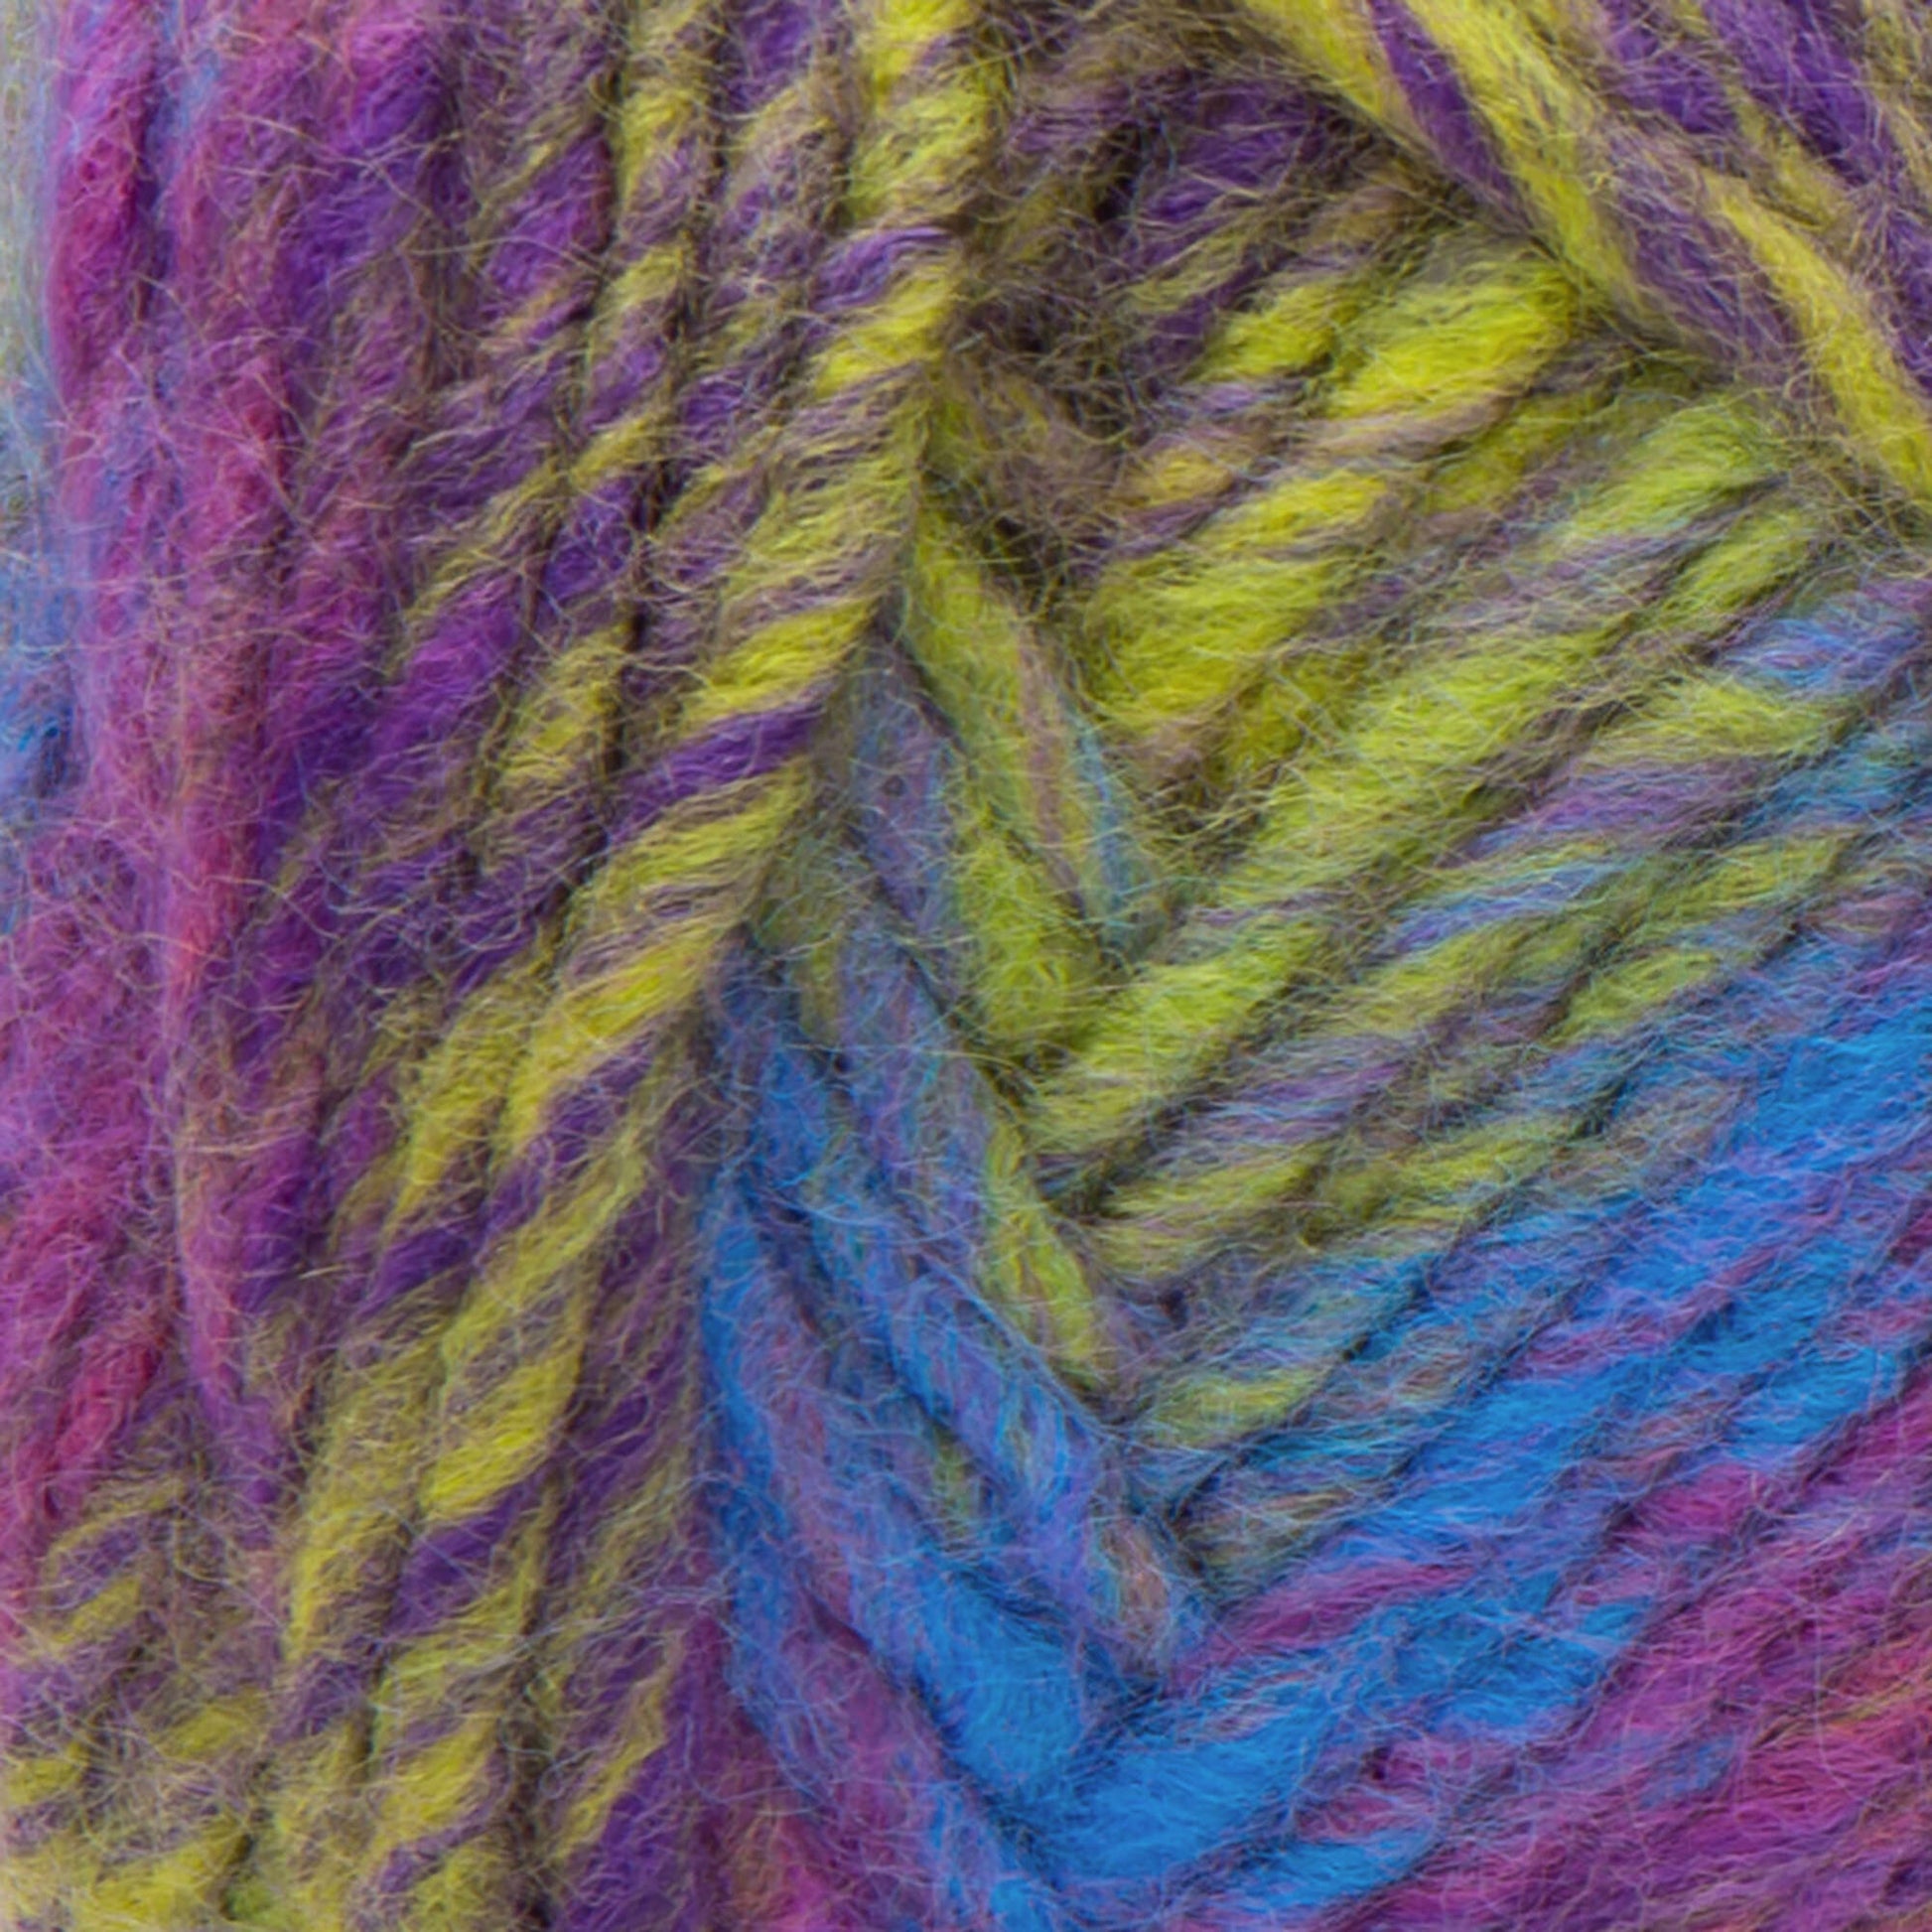 Red Heart Colorscape Yarn - Discontinued shades Barcelona